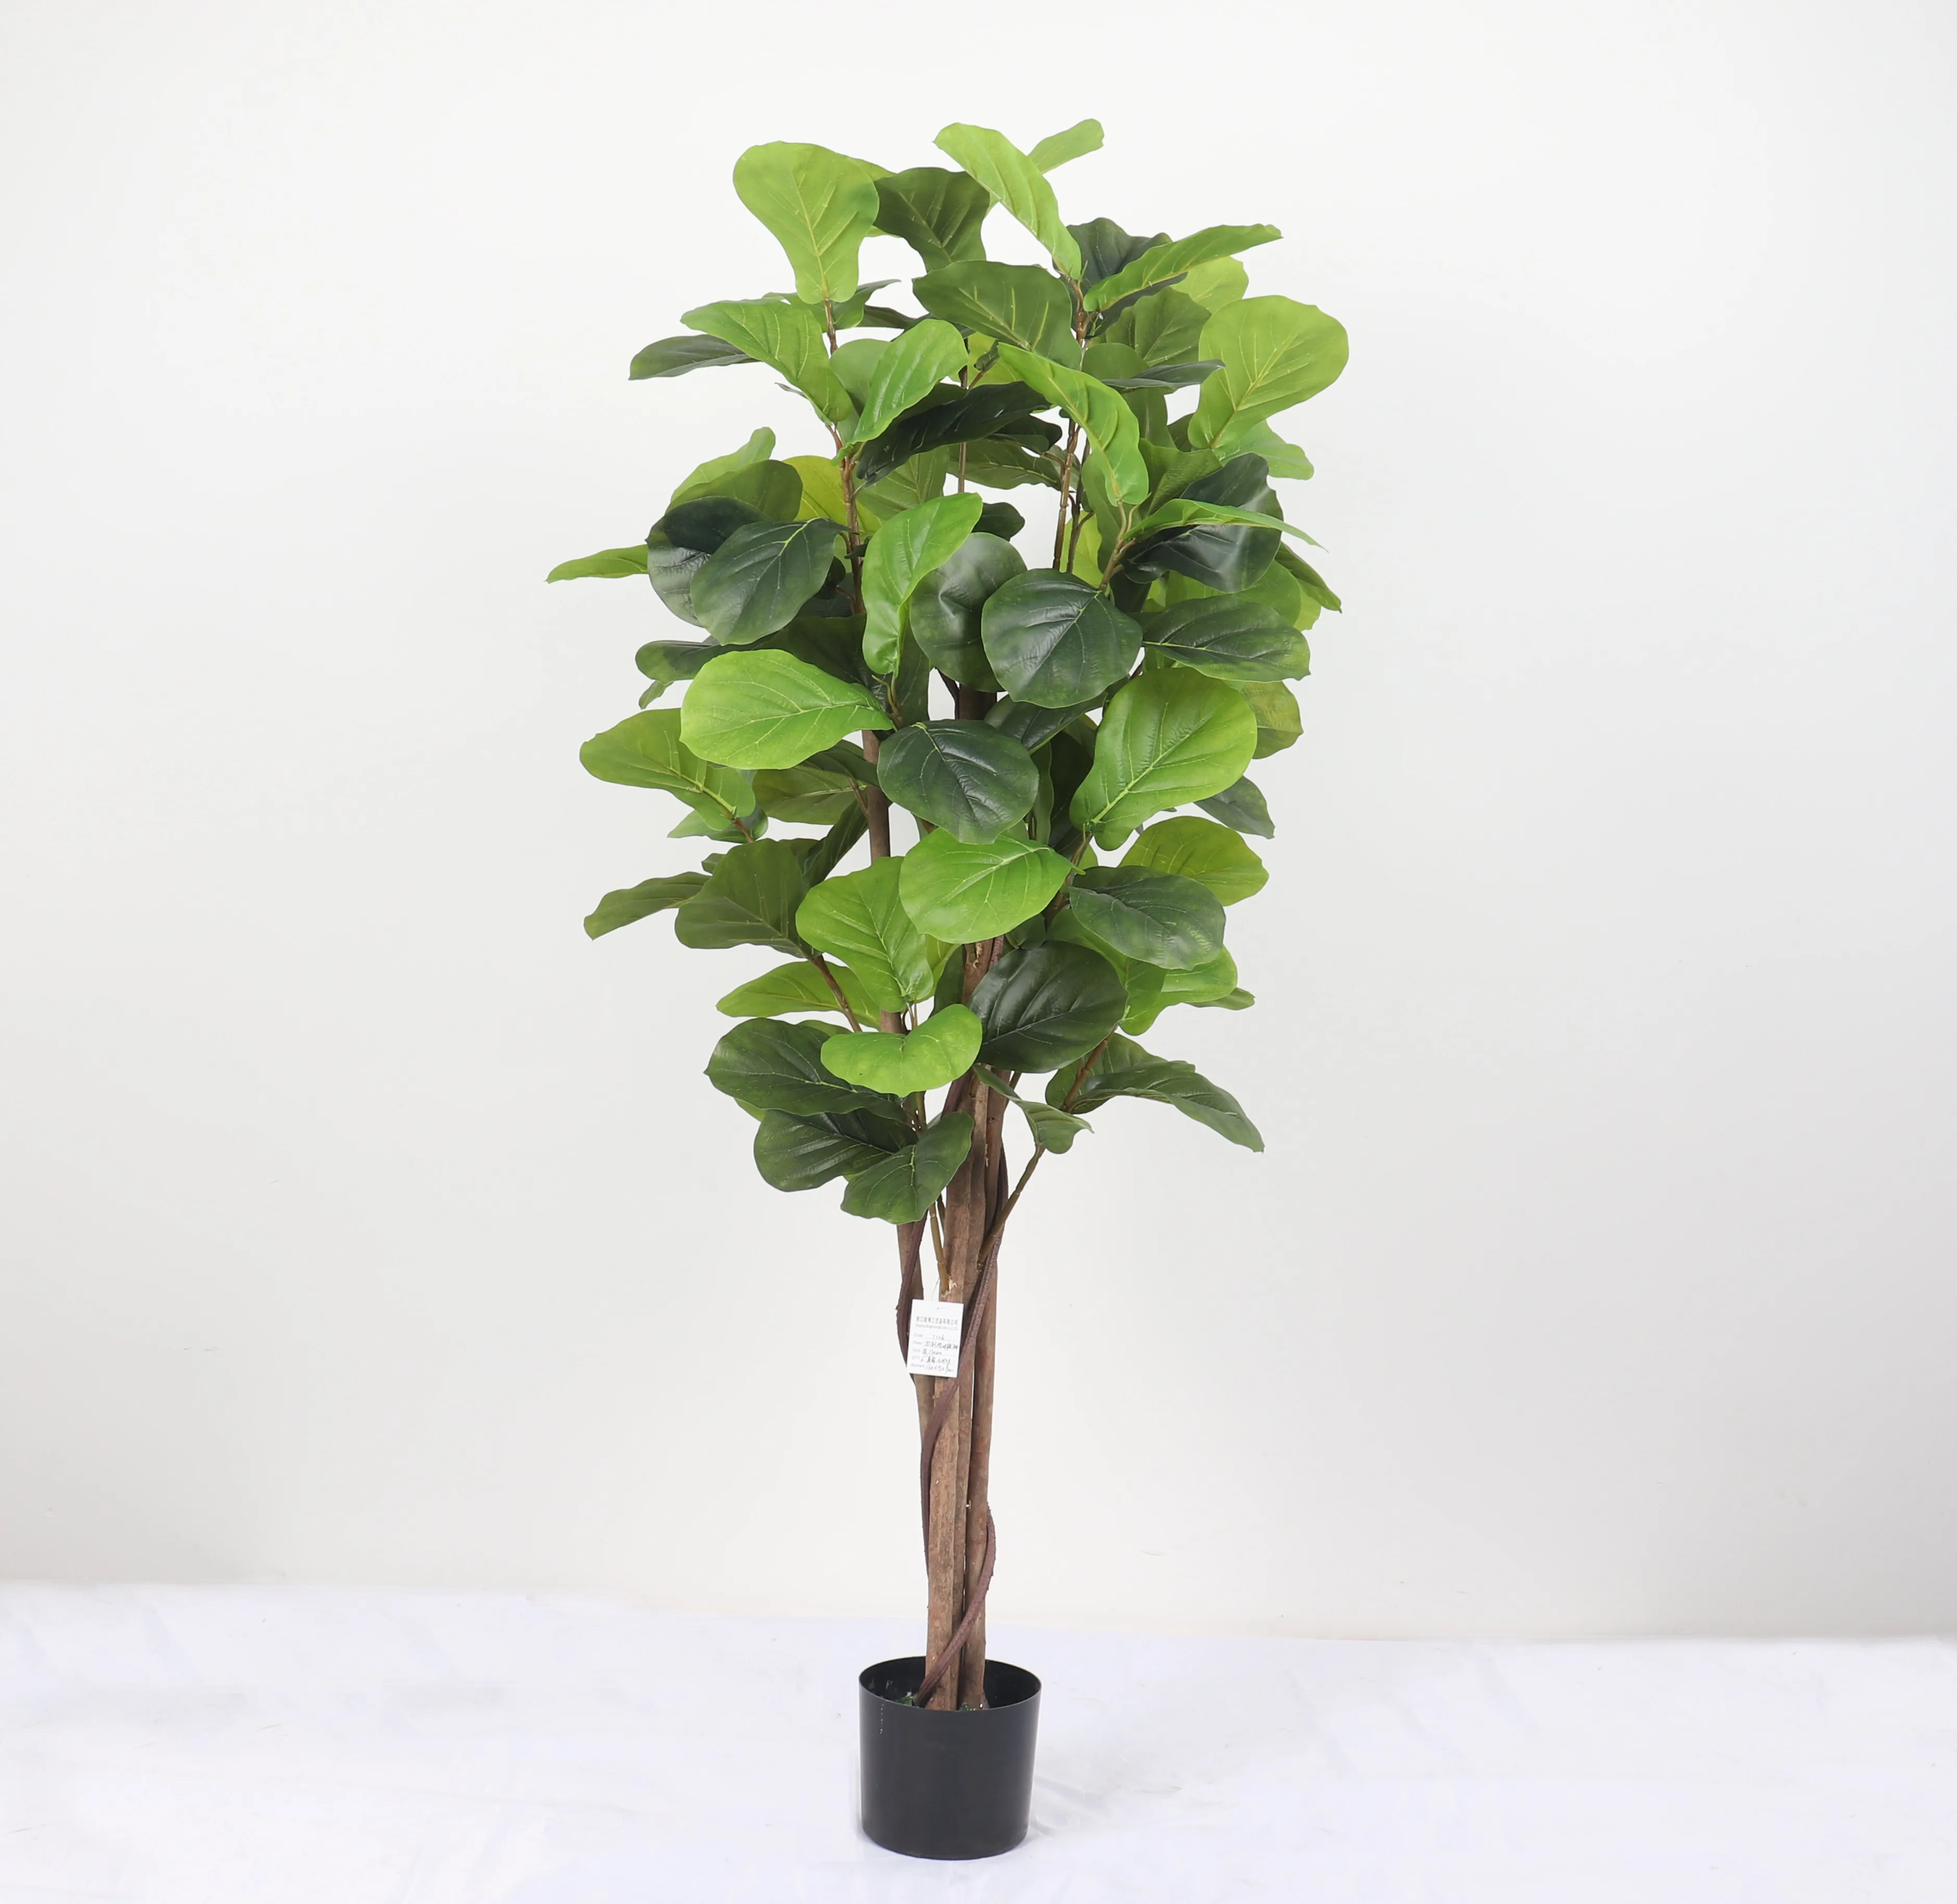 

Factory high quality artificial potted green plants plastic faux fiddle leaf fig tree for decor